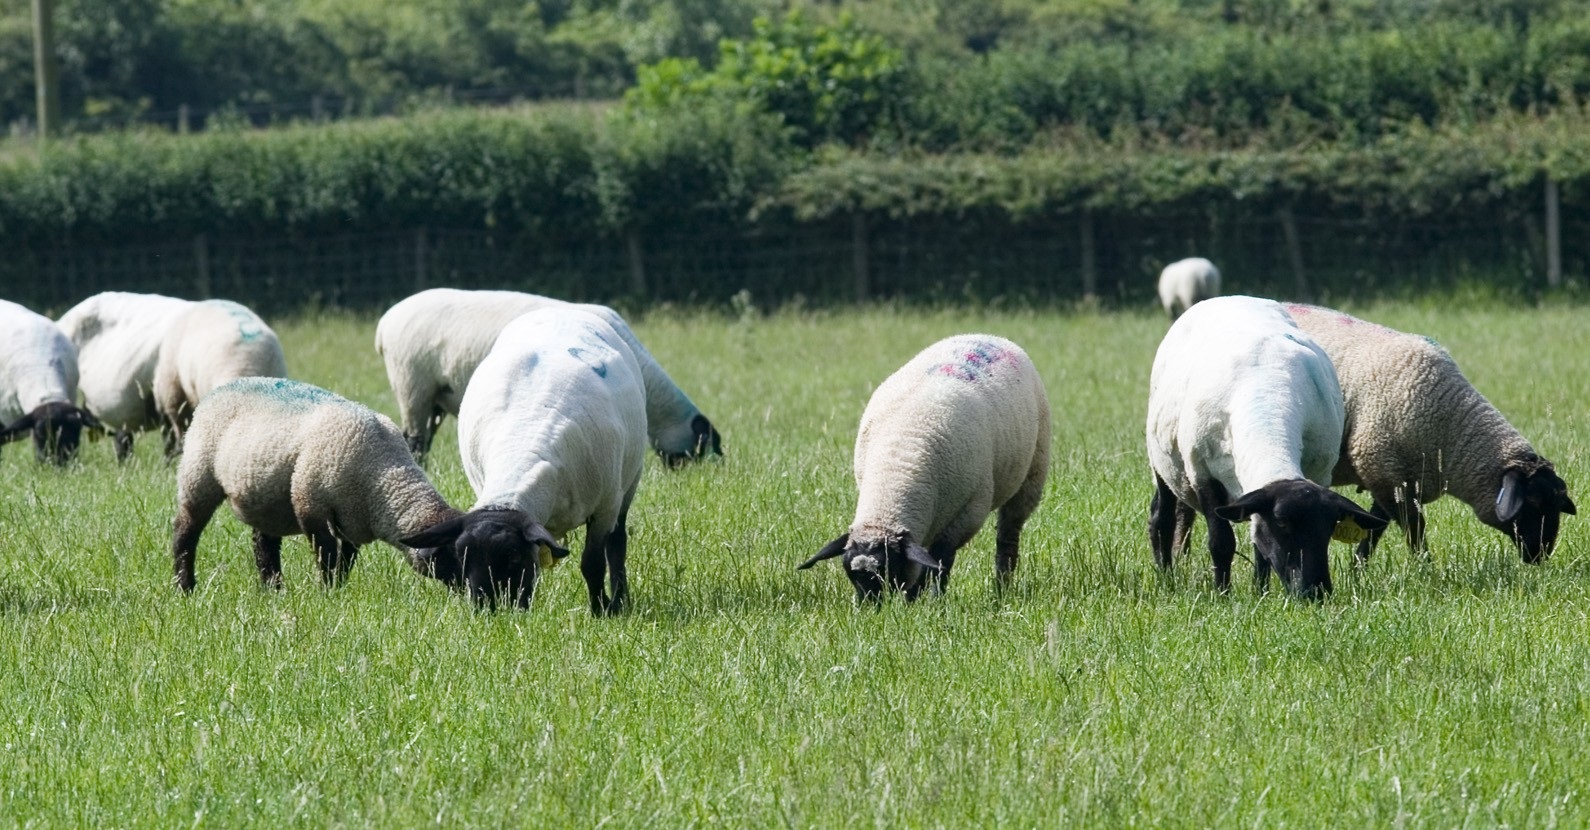 Sheep scab is a notifiable disease, with farmers required to speedily report suspected cases to their local Animal and Plant Health Agency (APHA) office, while also alerting neighbouring farmers.